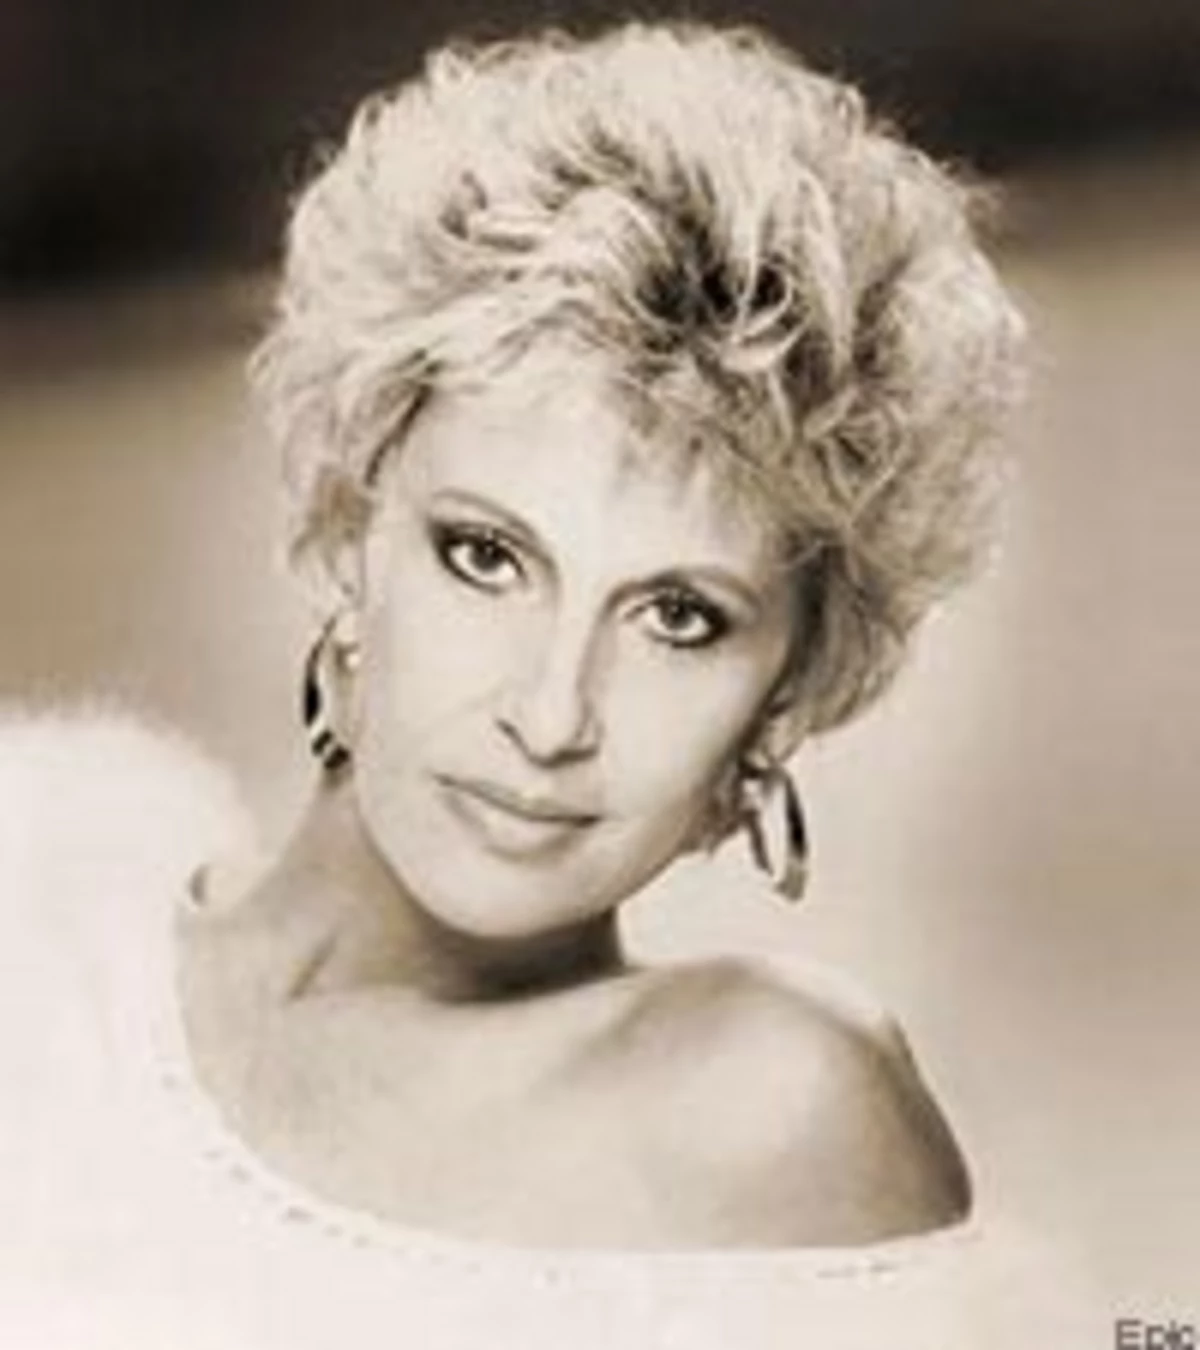 Tammy Wynette Exhibit Set for Country Music Hall of Fame